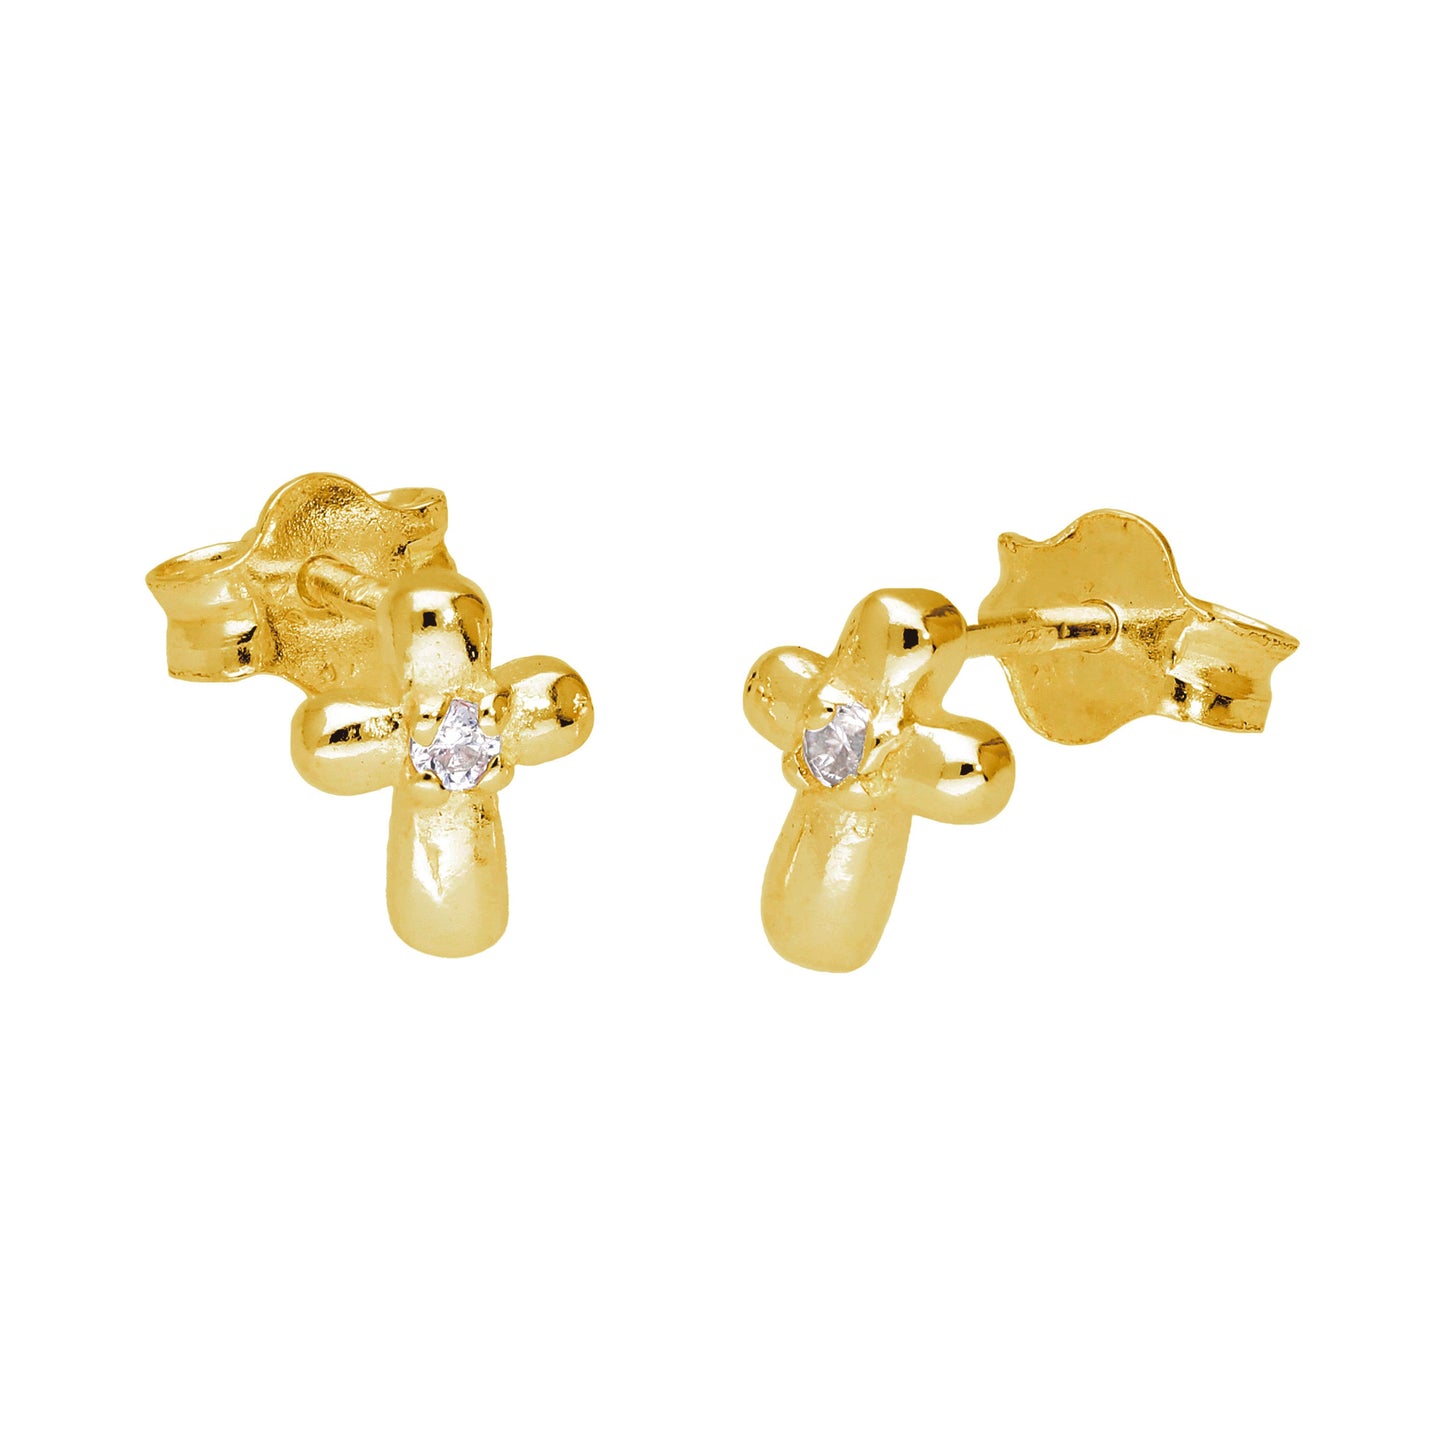 Gold Plated Sterling Silver Tiny Cross CZ Stud Earrings